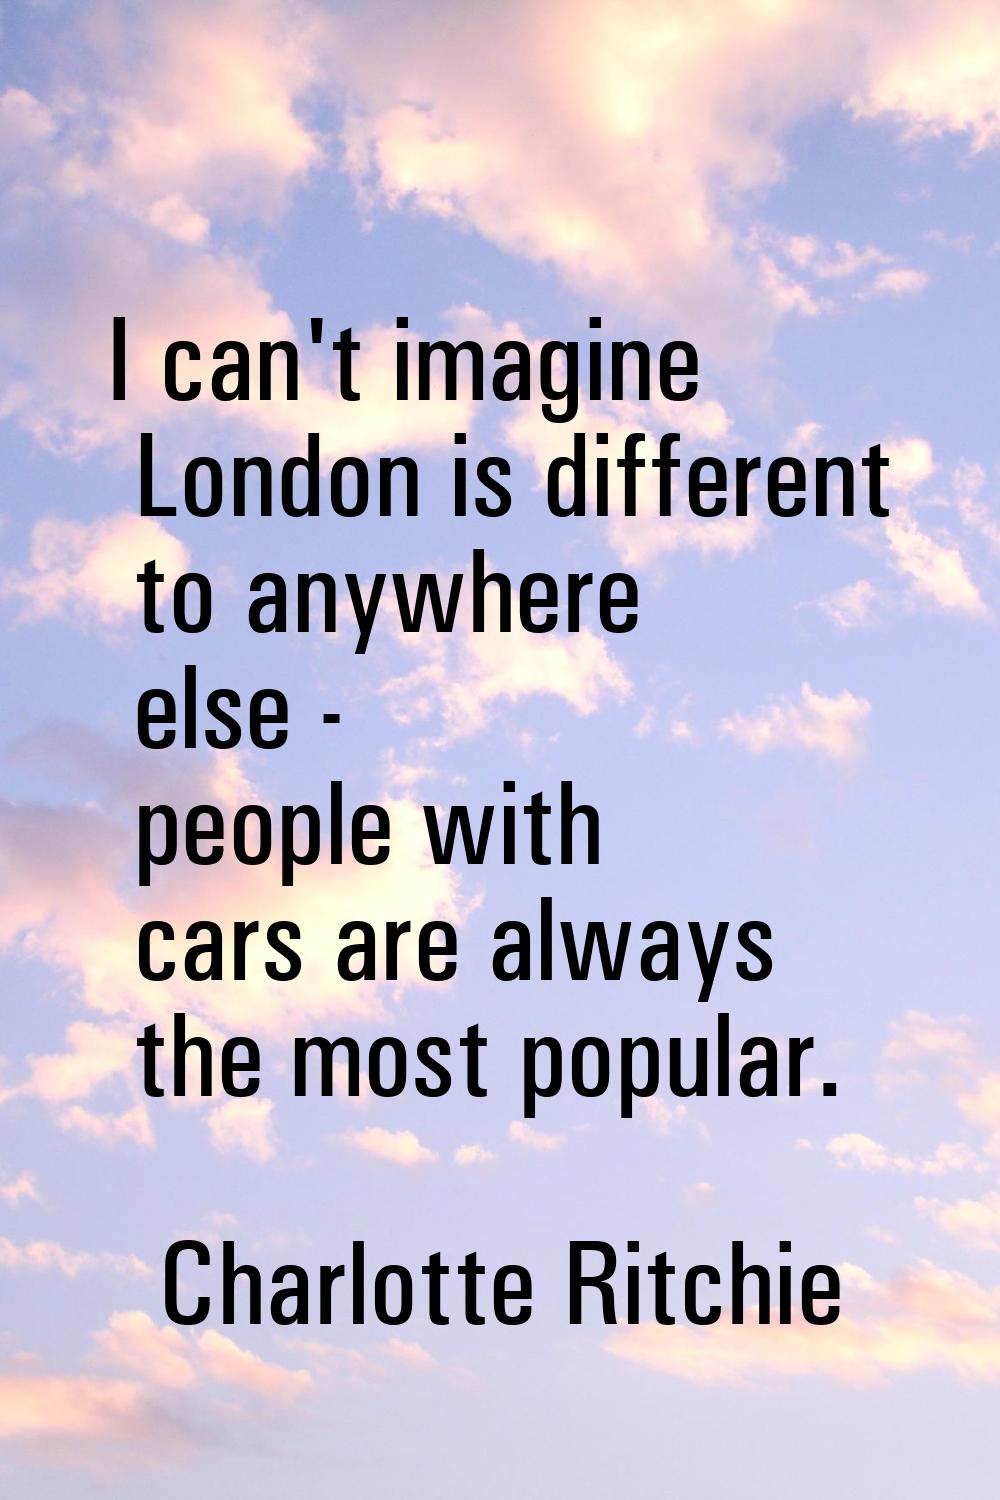 I can't imagine London is different to anywhere else - people with cars are always the most popular